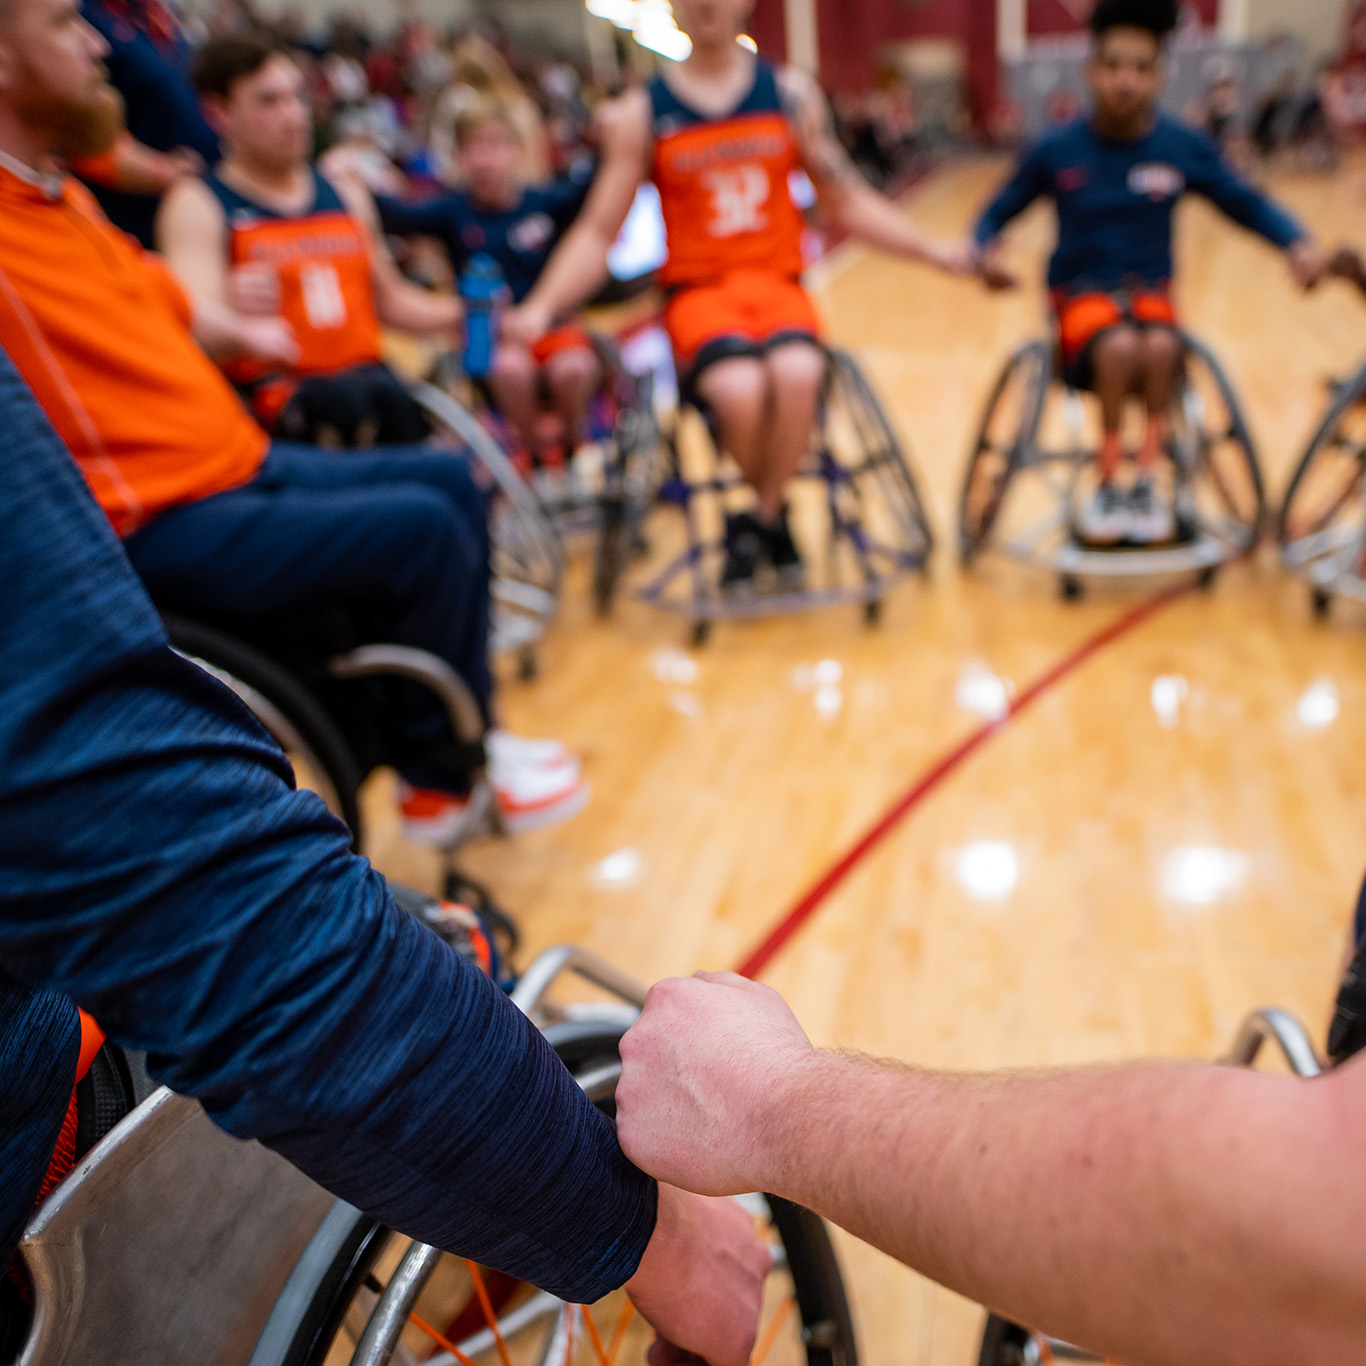 Illini wheelchair basketball team huddled in a circle on the court.